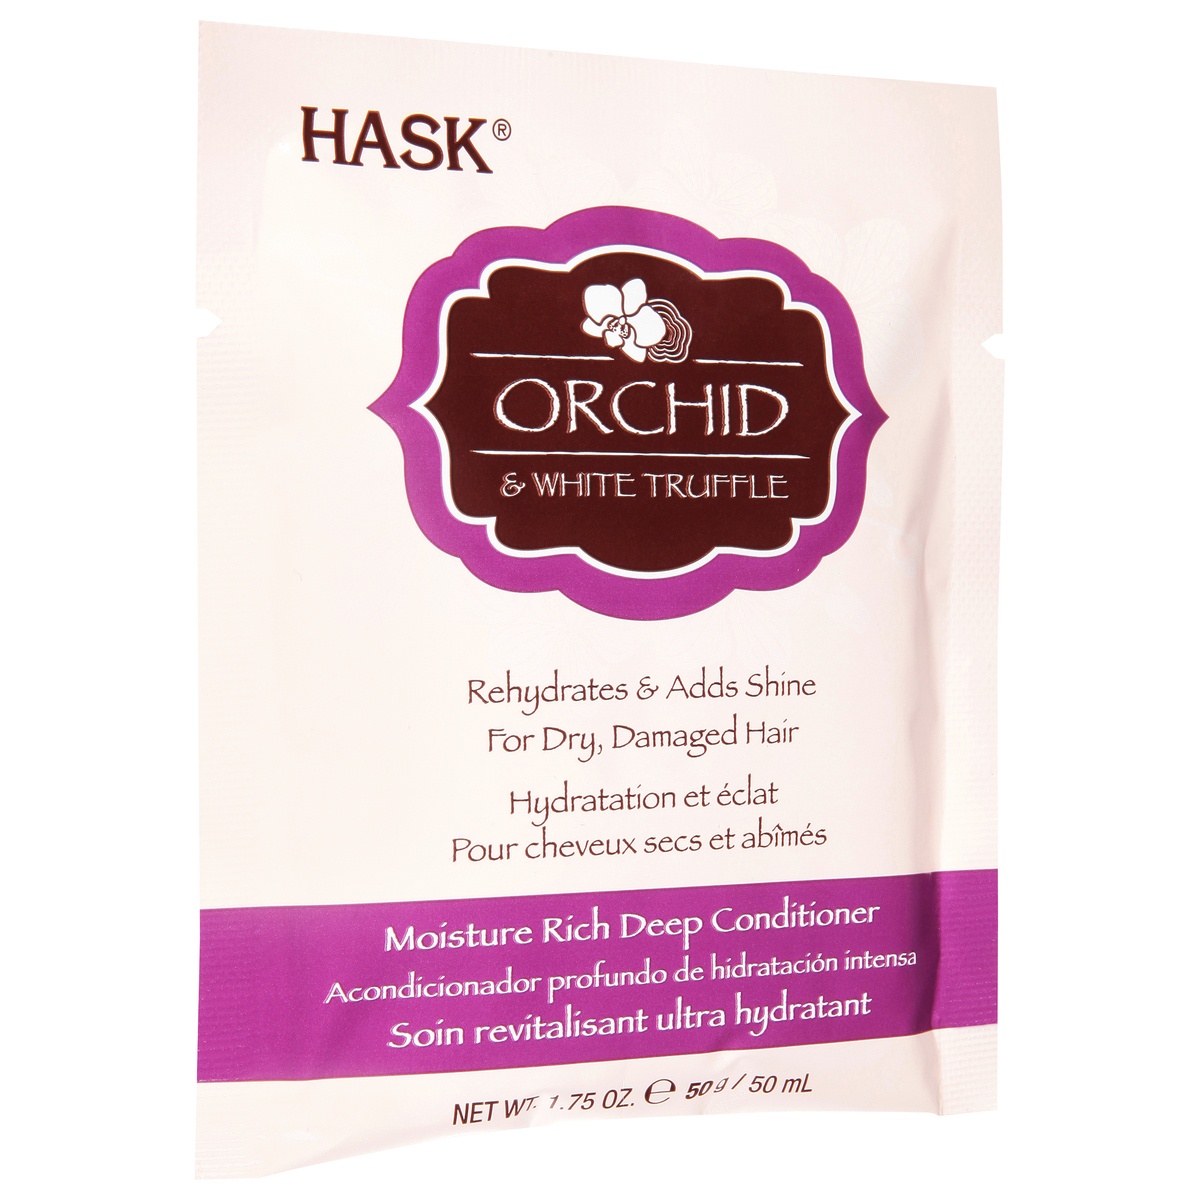 slide 2 of 10, Hask Orchid White Truffle Moisture Rich Deep Conditioner, 1.75 oz